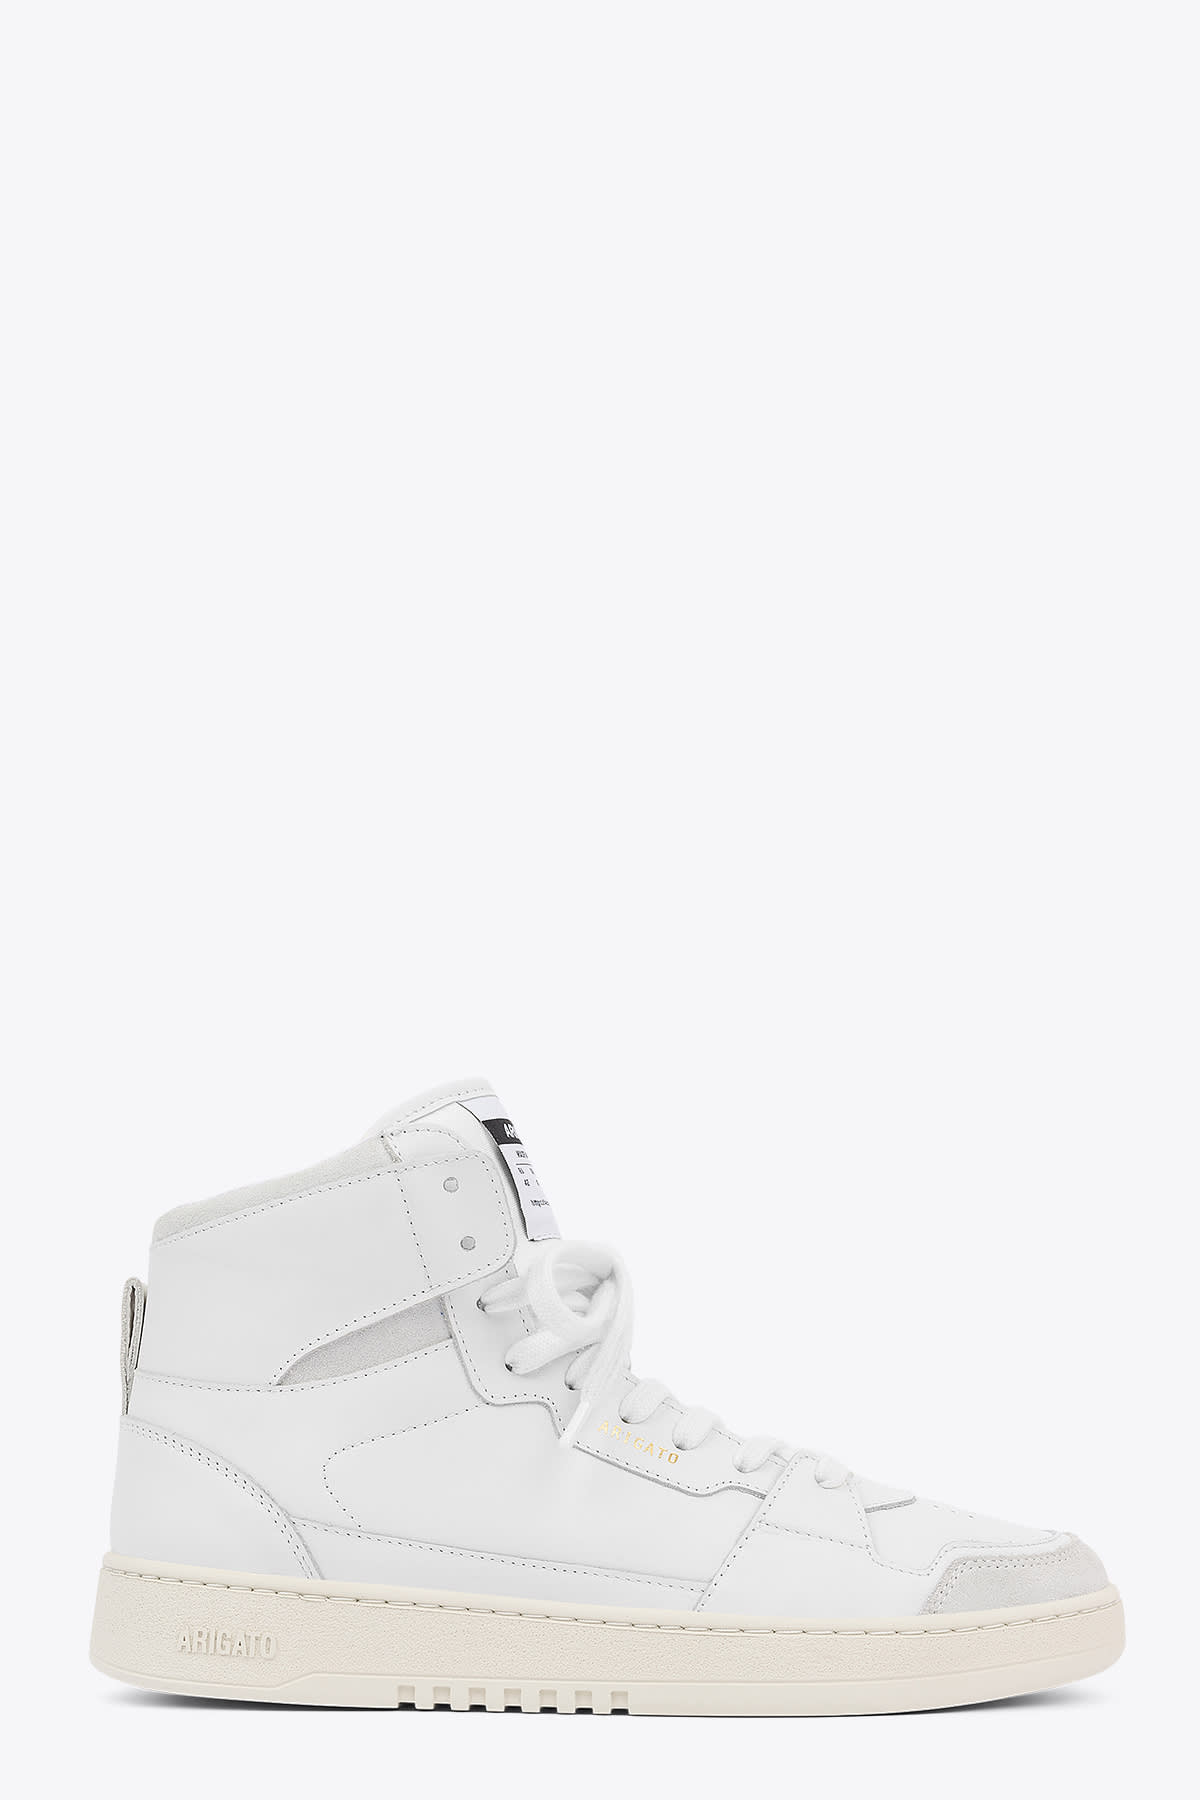 Axel Arigato Ace Hi White leather hi top lace-up sneaker - Dice hi